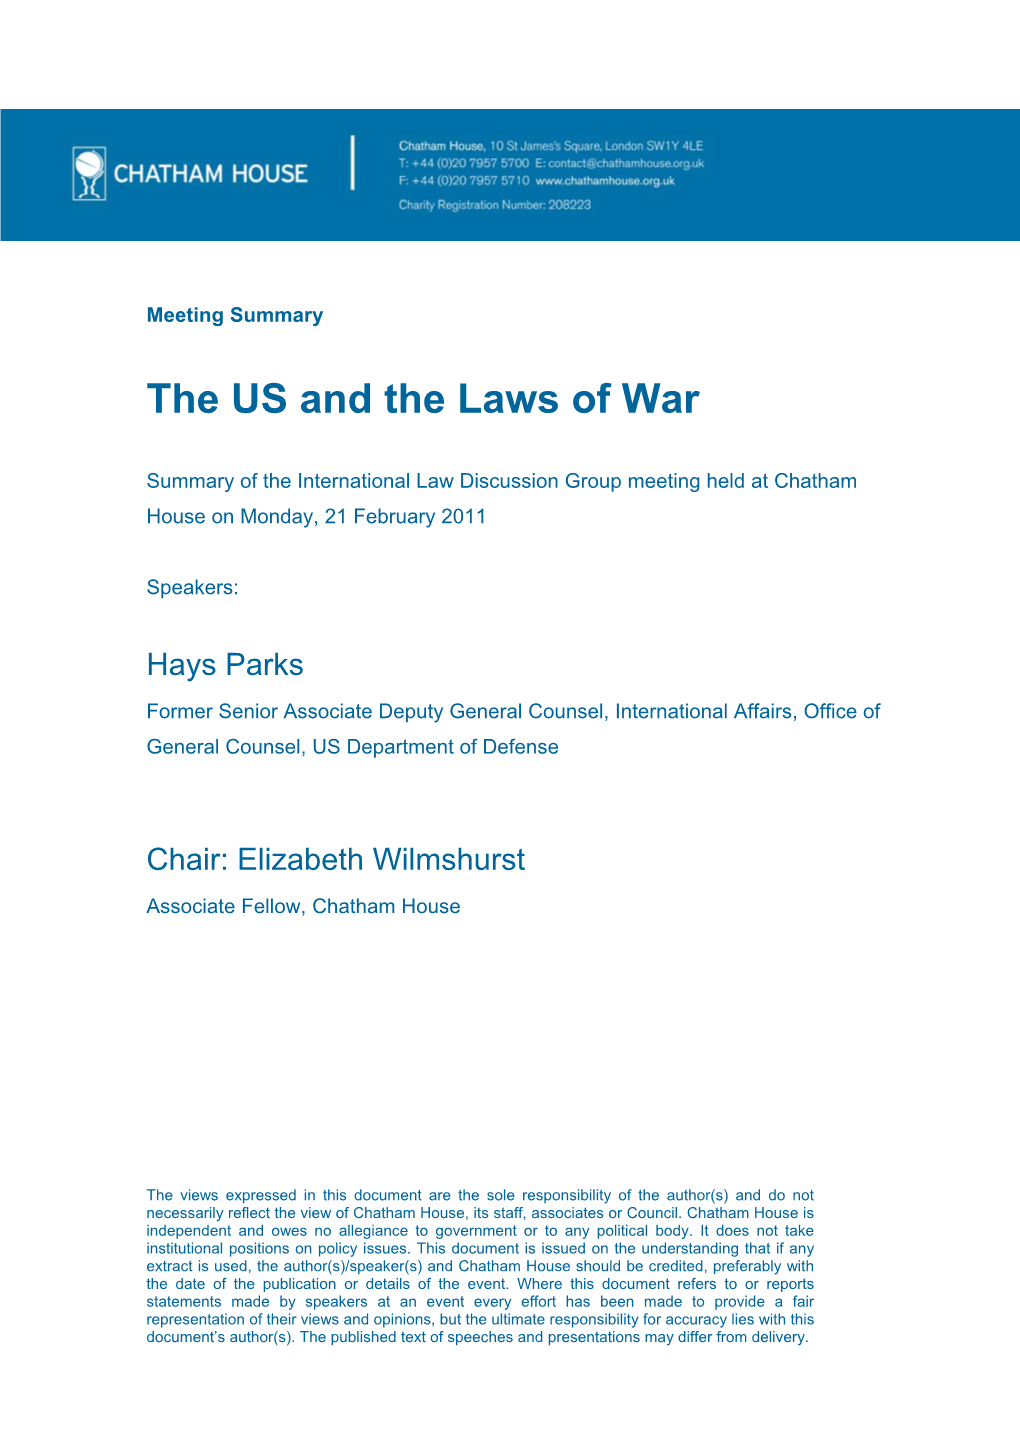 The US and the Laws of War